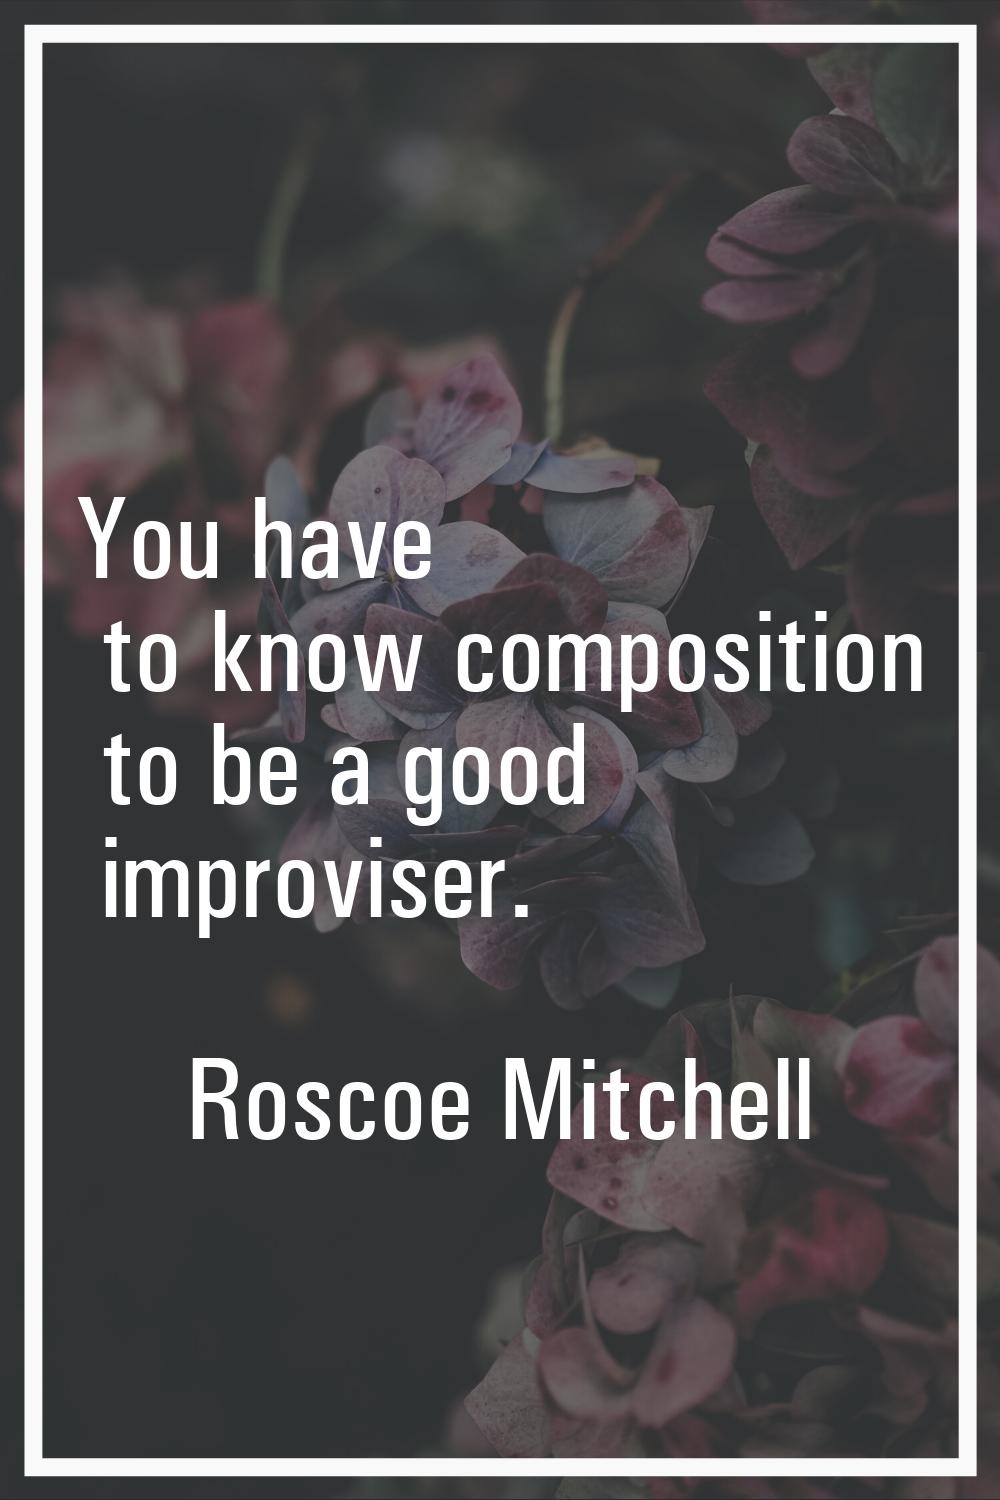 You have to know composition to be a good improviser.